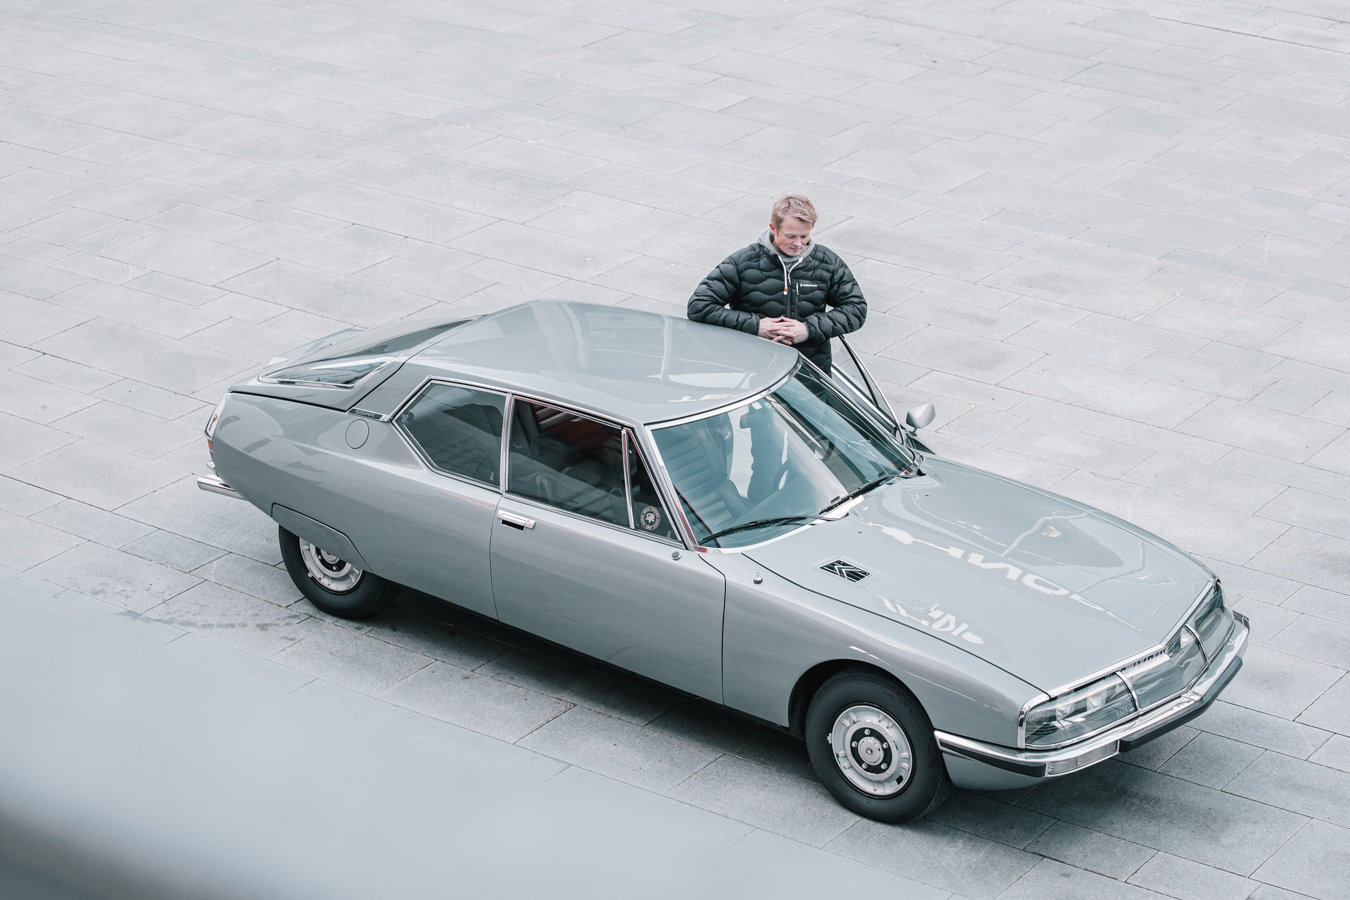 Citroen SM - the full story of a 1970s Maserati-engined icon